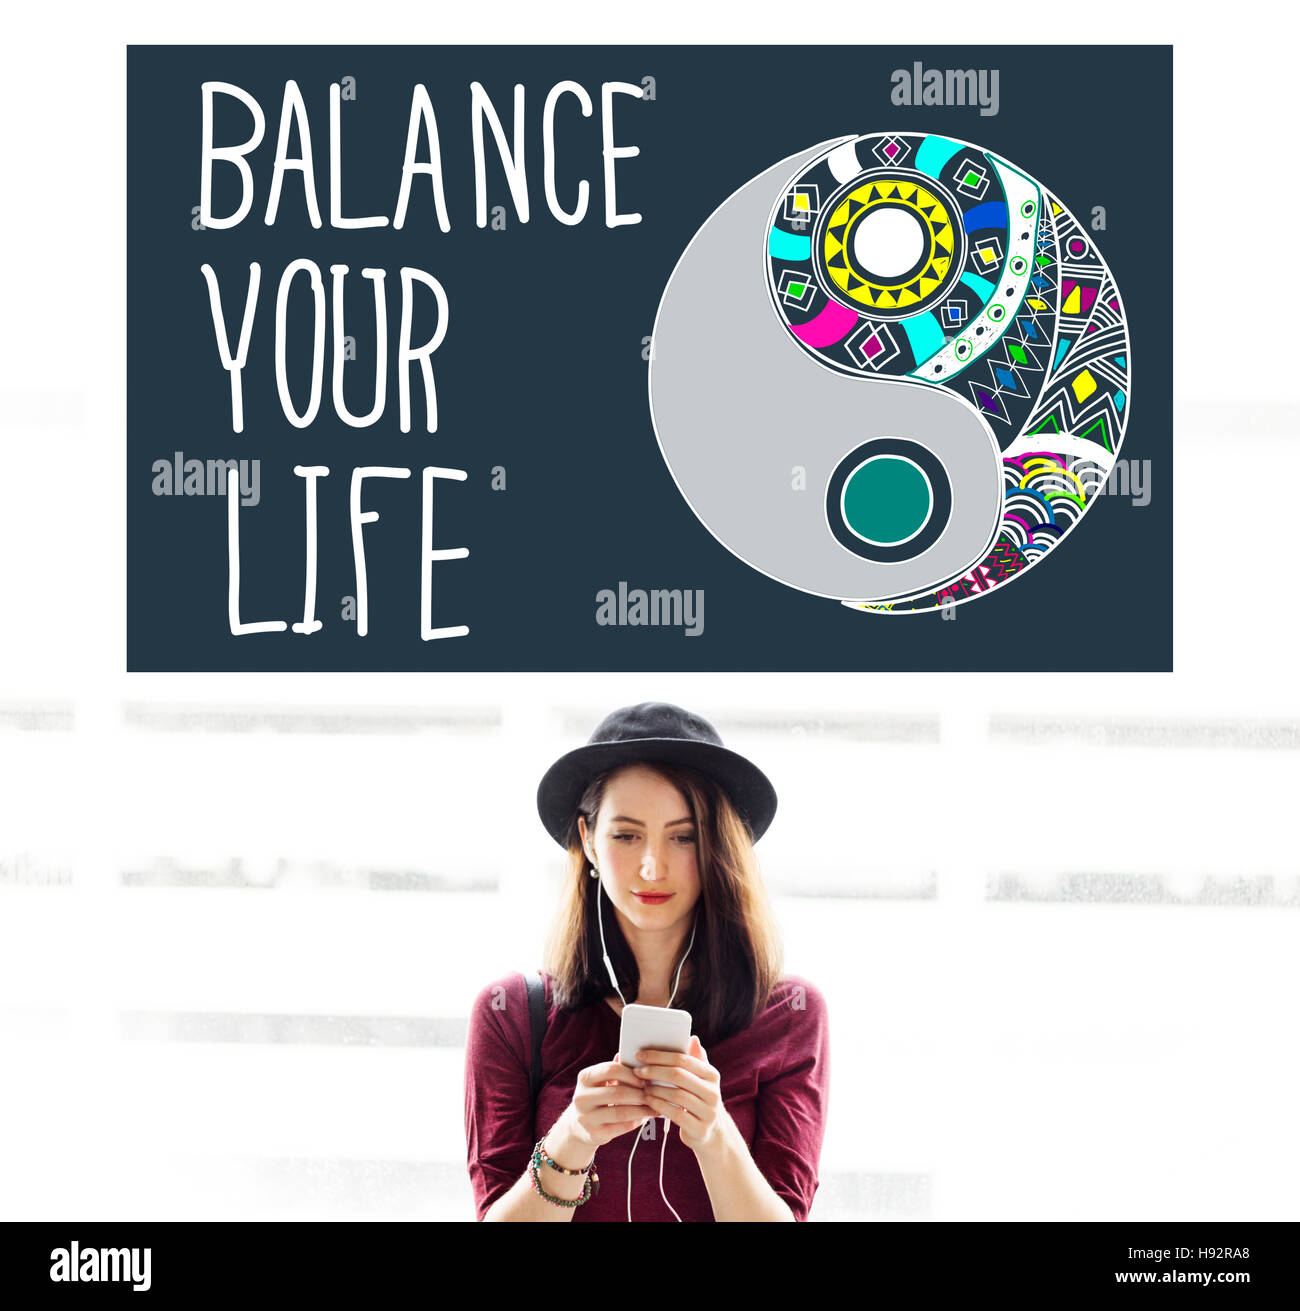 Balance Your Life Stability Work-Life Concept Stock Photo